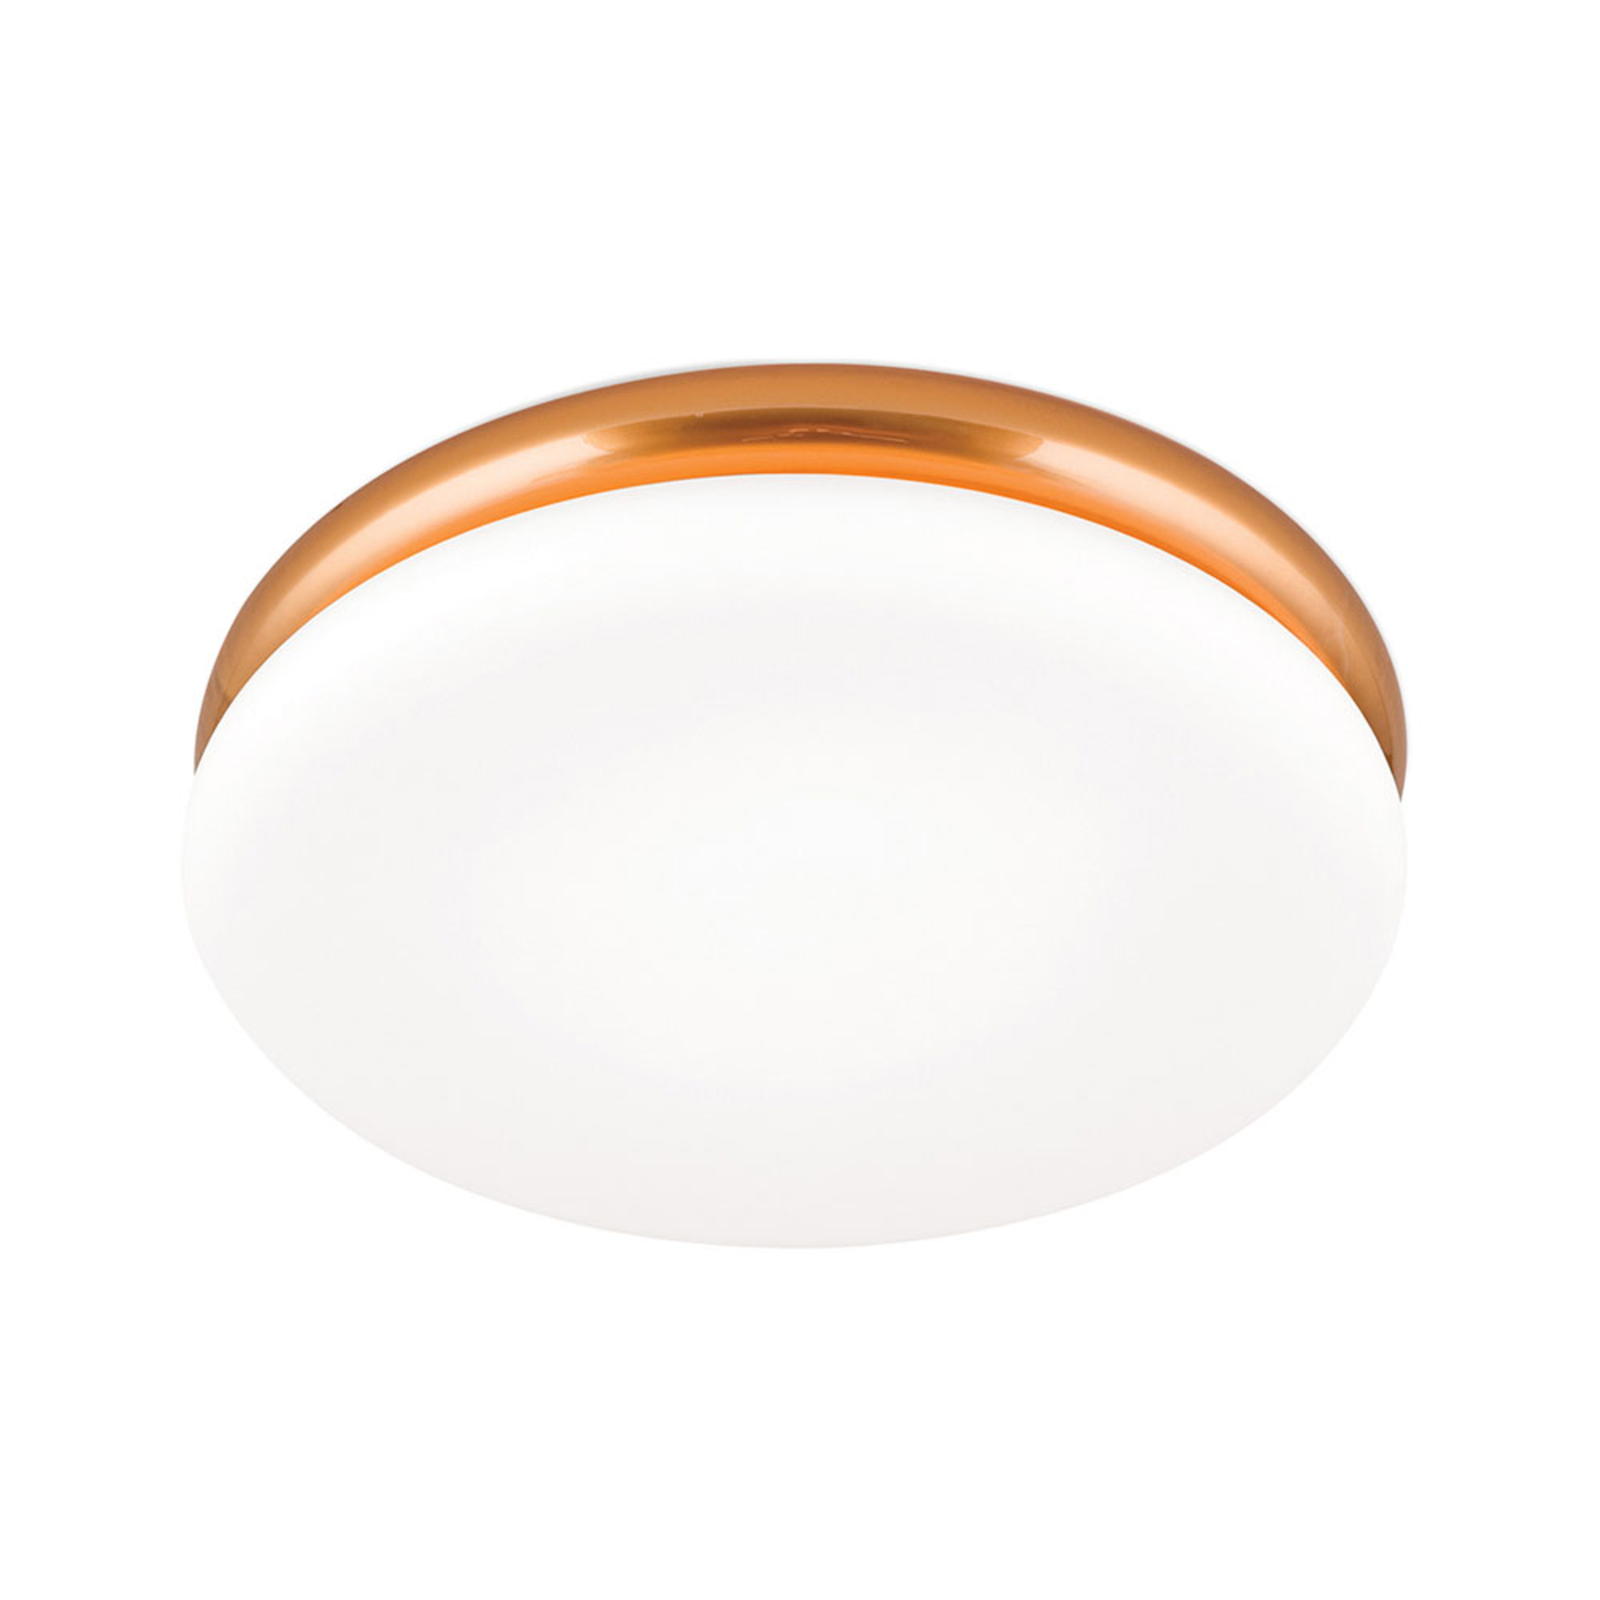 James LED ceiling light with metal housing, copper